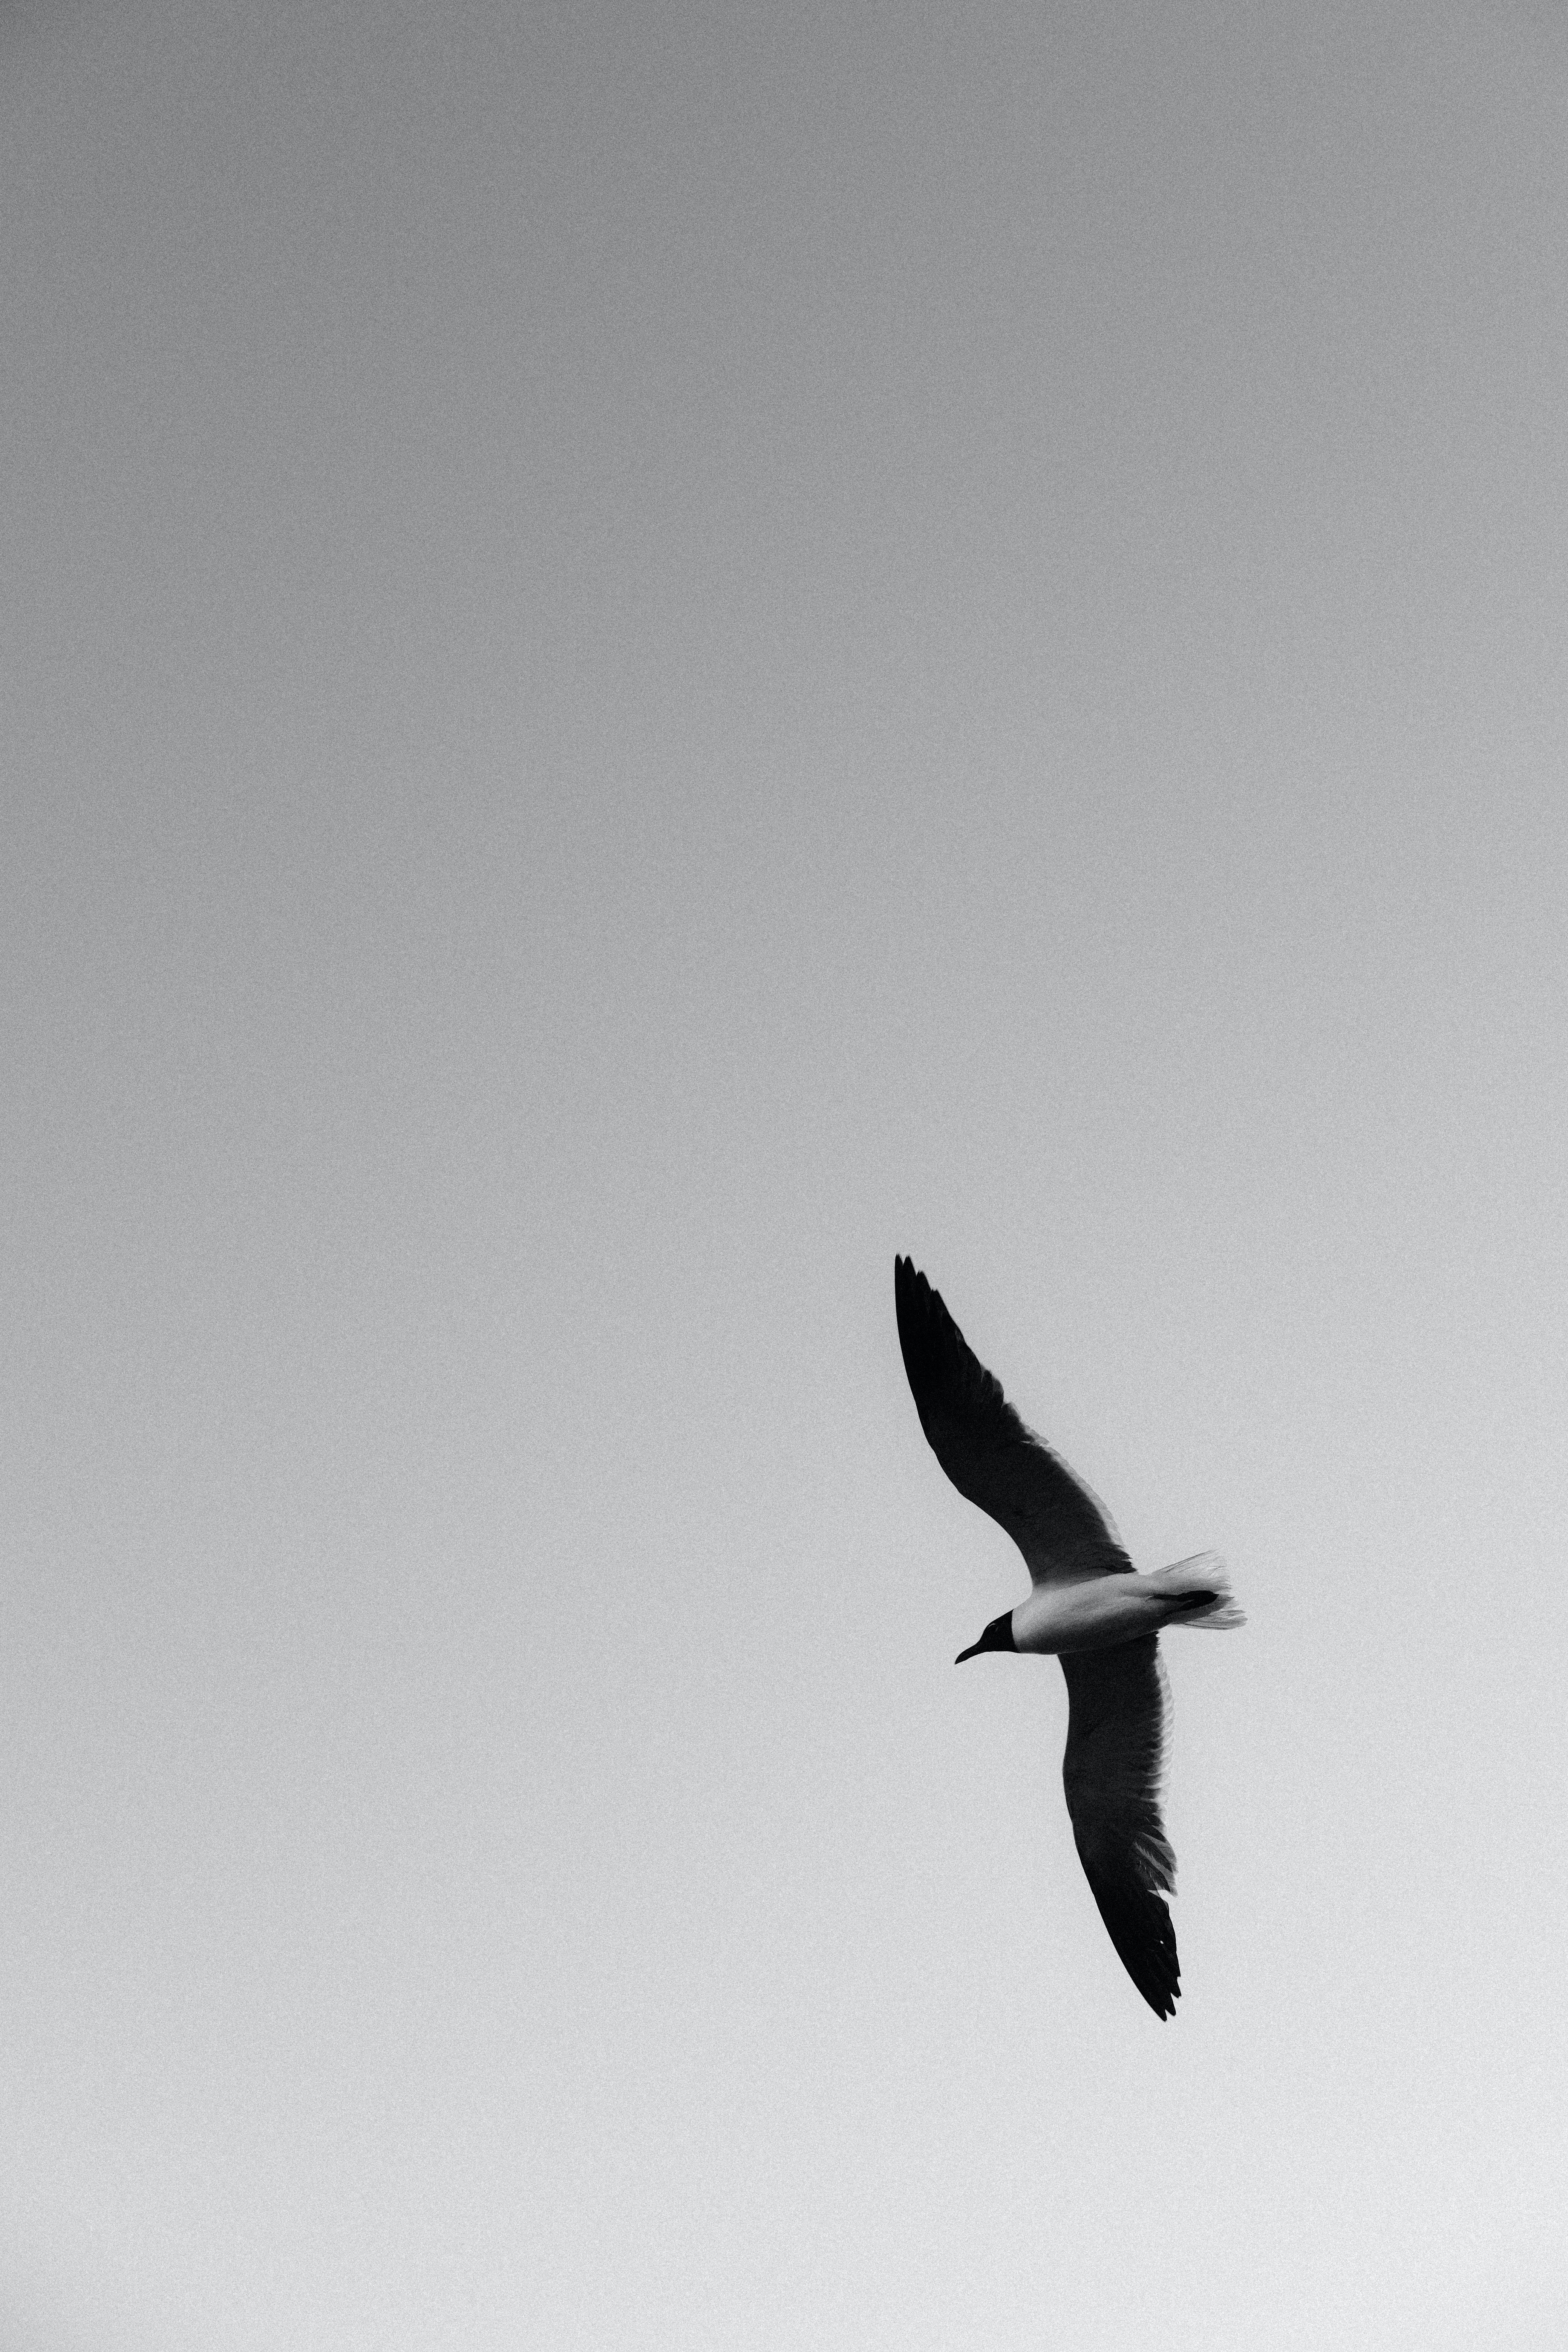 bw, gull, animals, bird, flight, chb, seagull, wings wallpapers for tablet